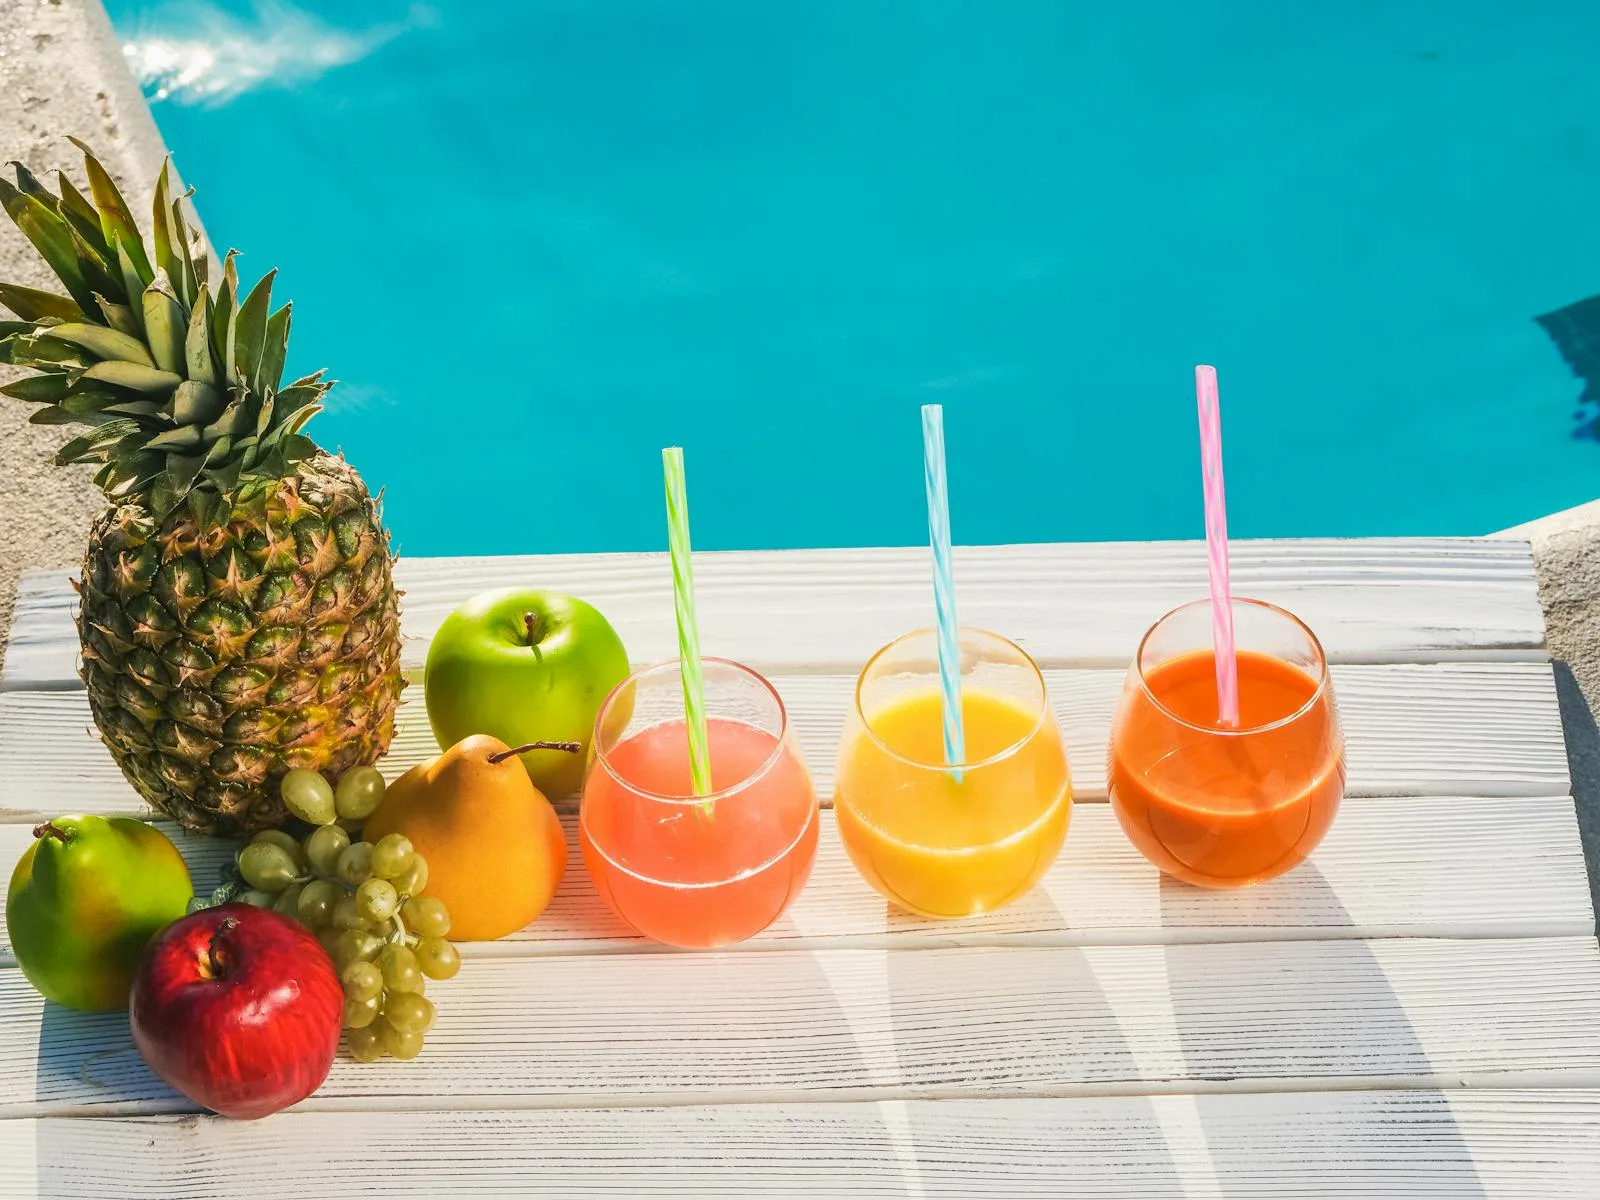 Fruits and Fruit Drinks with Straws in a Row by a Swimming Pool